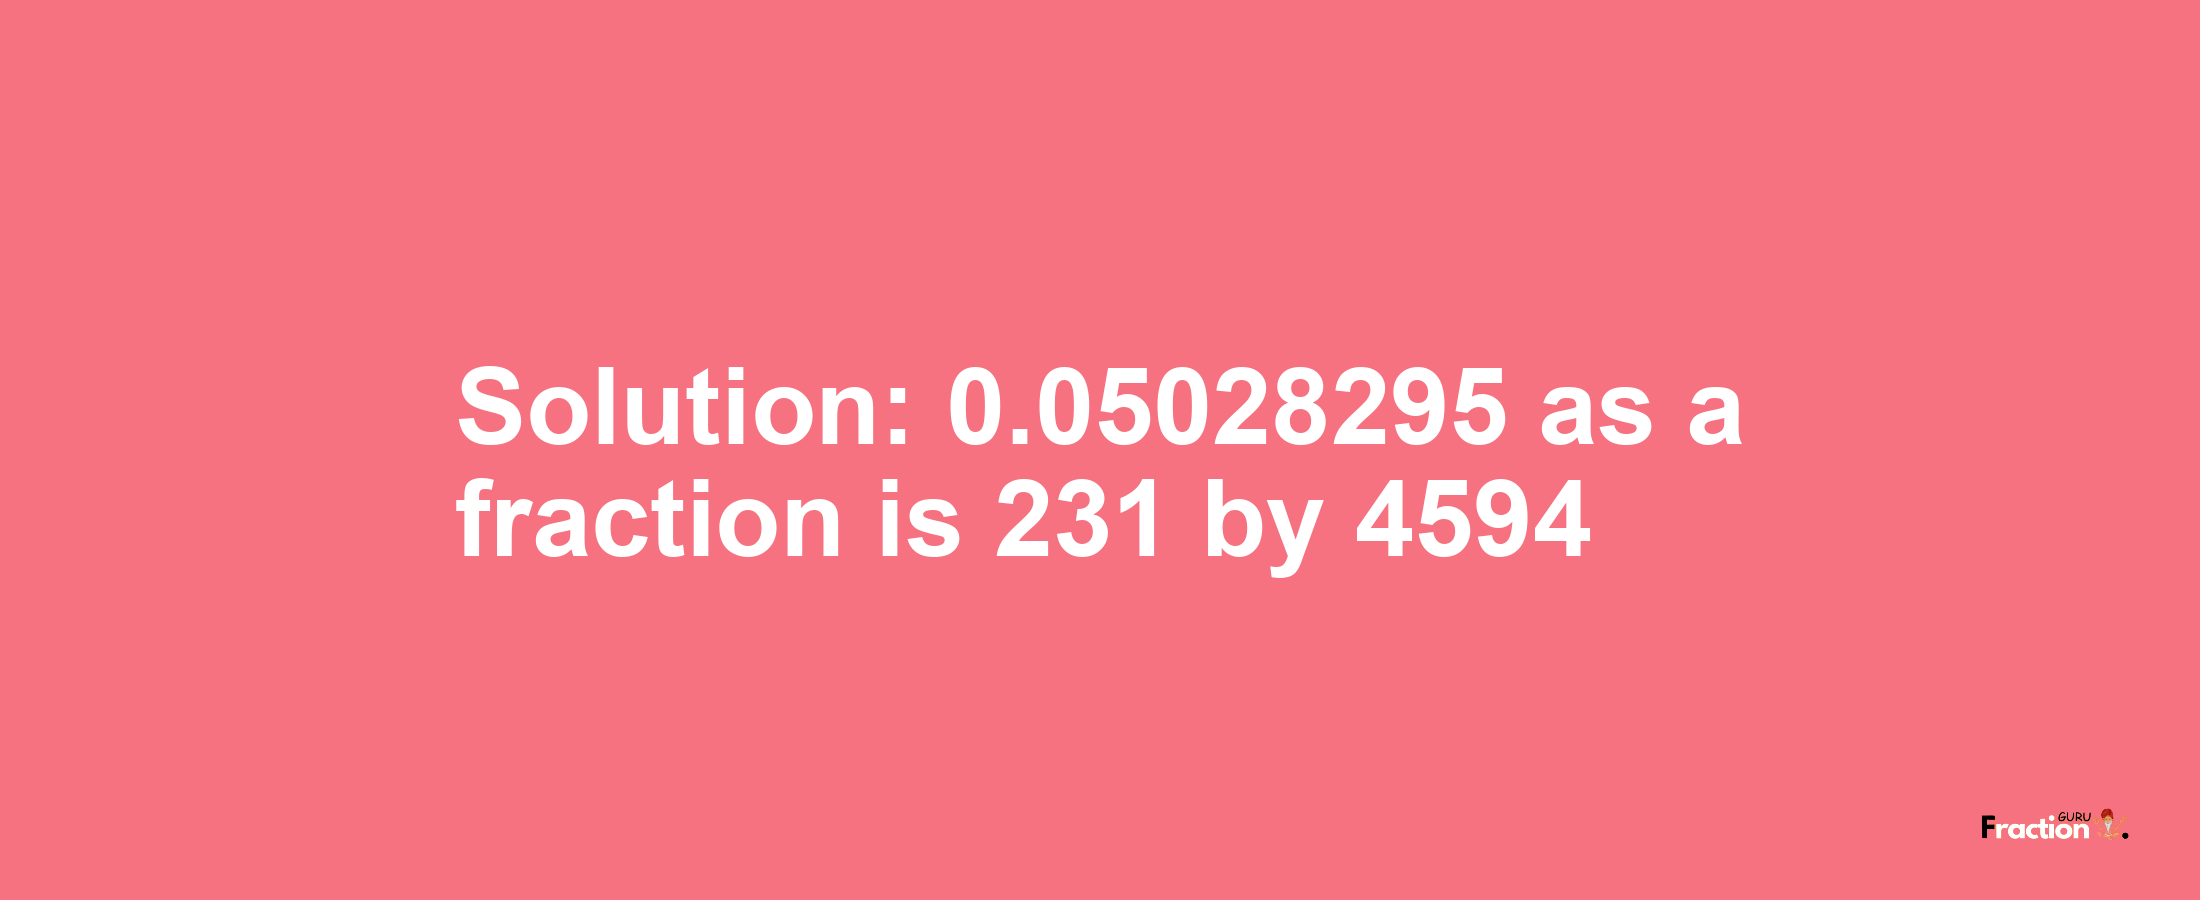 Solution:0.05028295 as a fraction is 231/4594